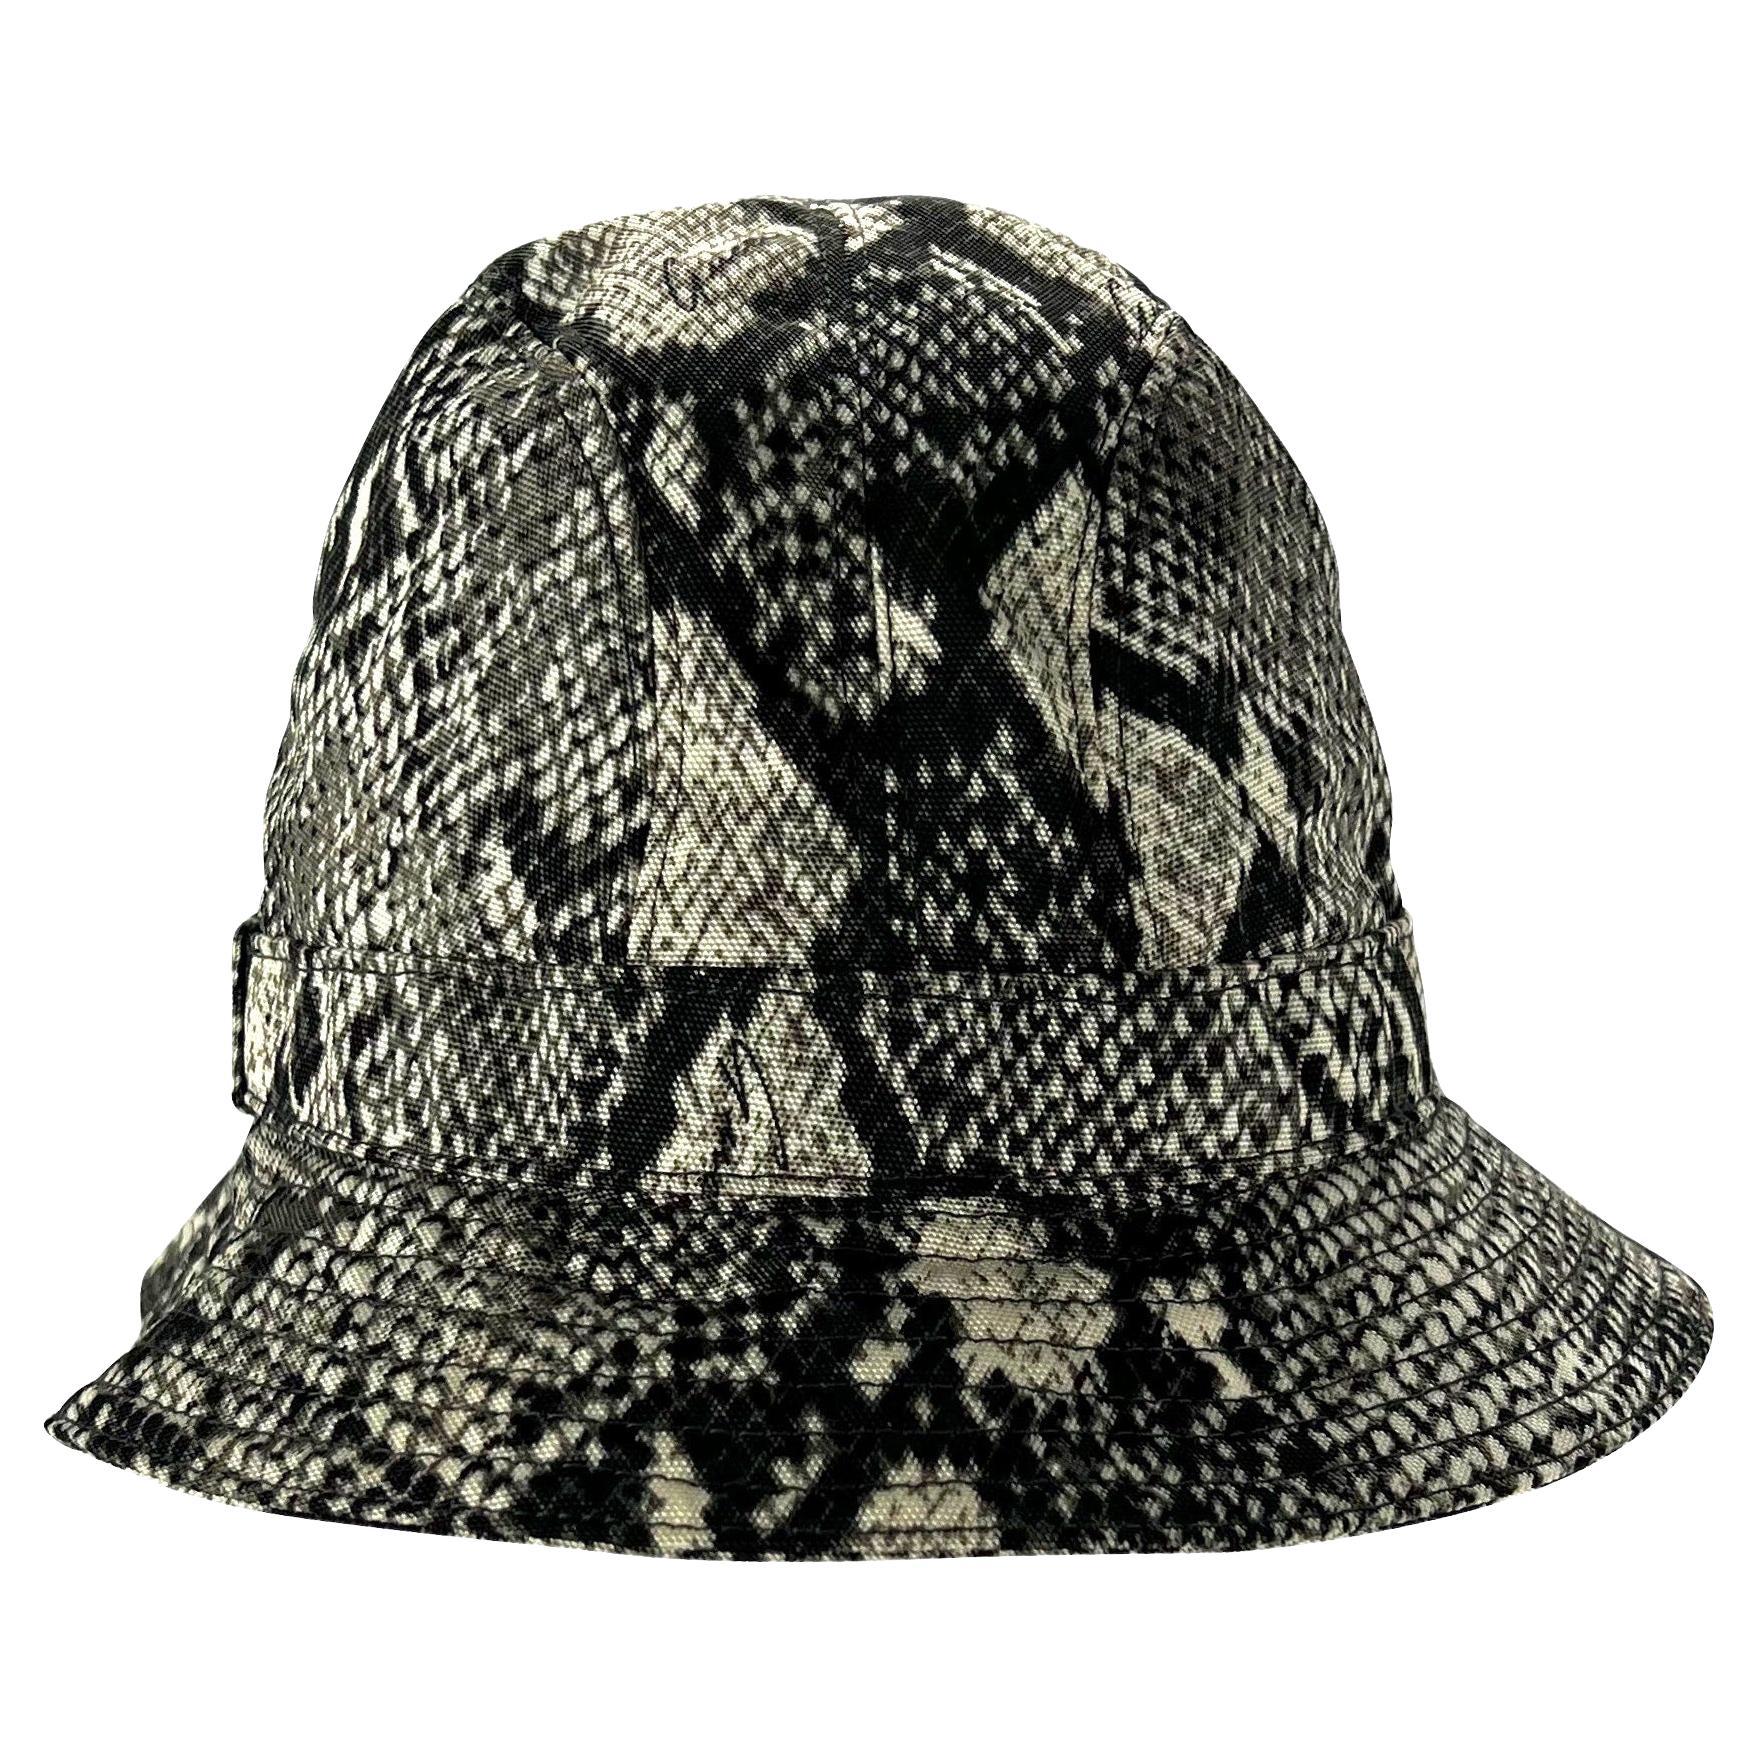 Black S/S 2000 Gucci by Tom Ford Snakeskin Print Grey Nylon Bucket Hat For Sale